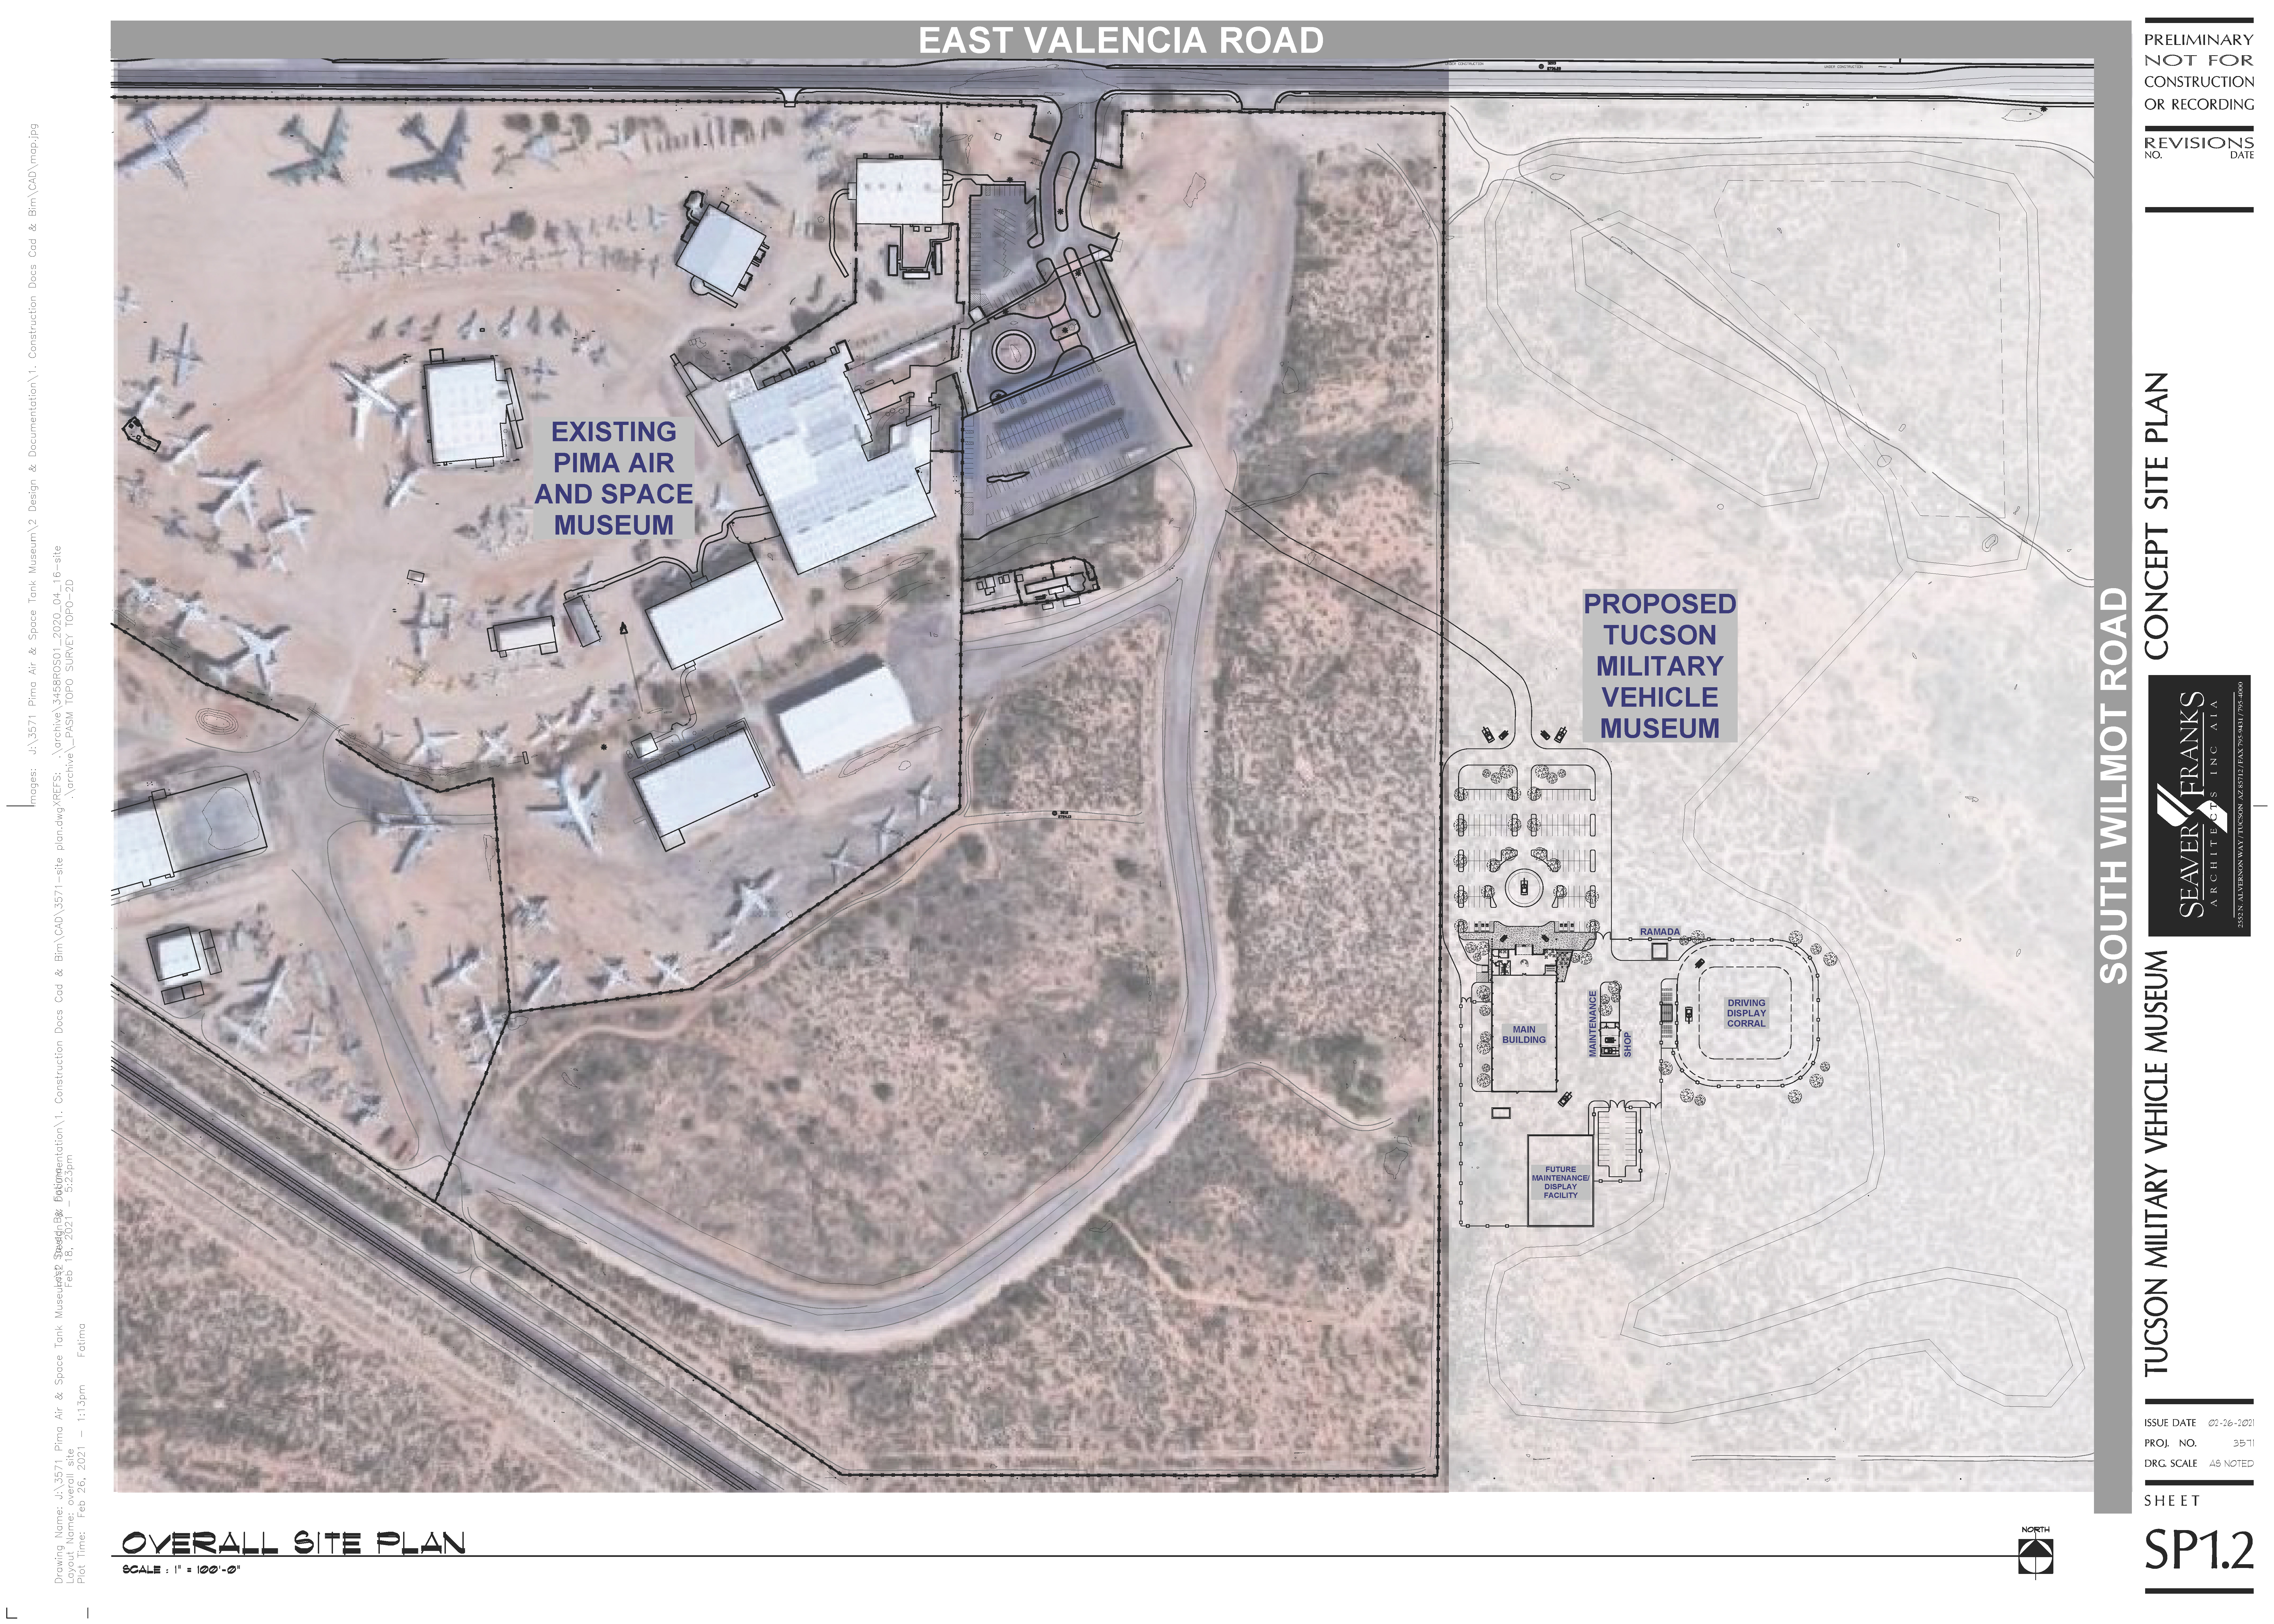 Pima Air and Space Military Vehicle Museum proposed section site plan